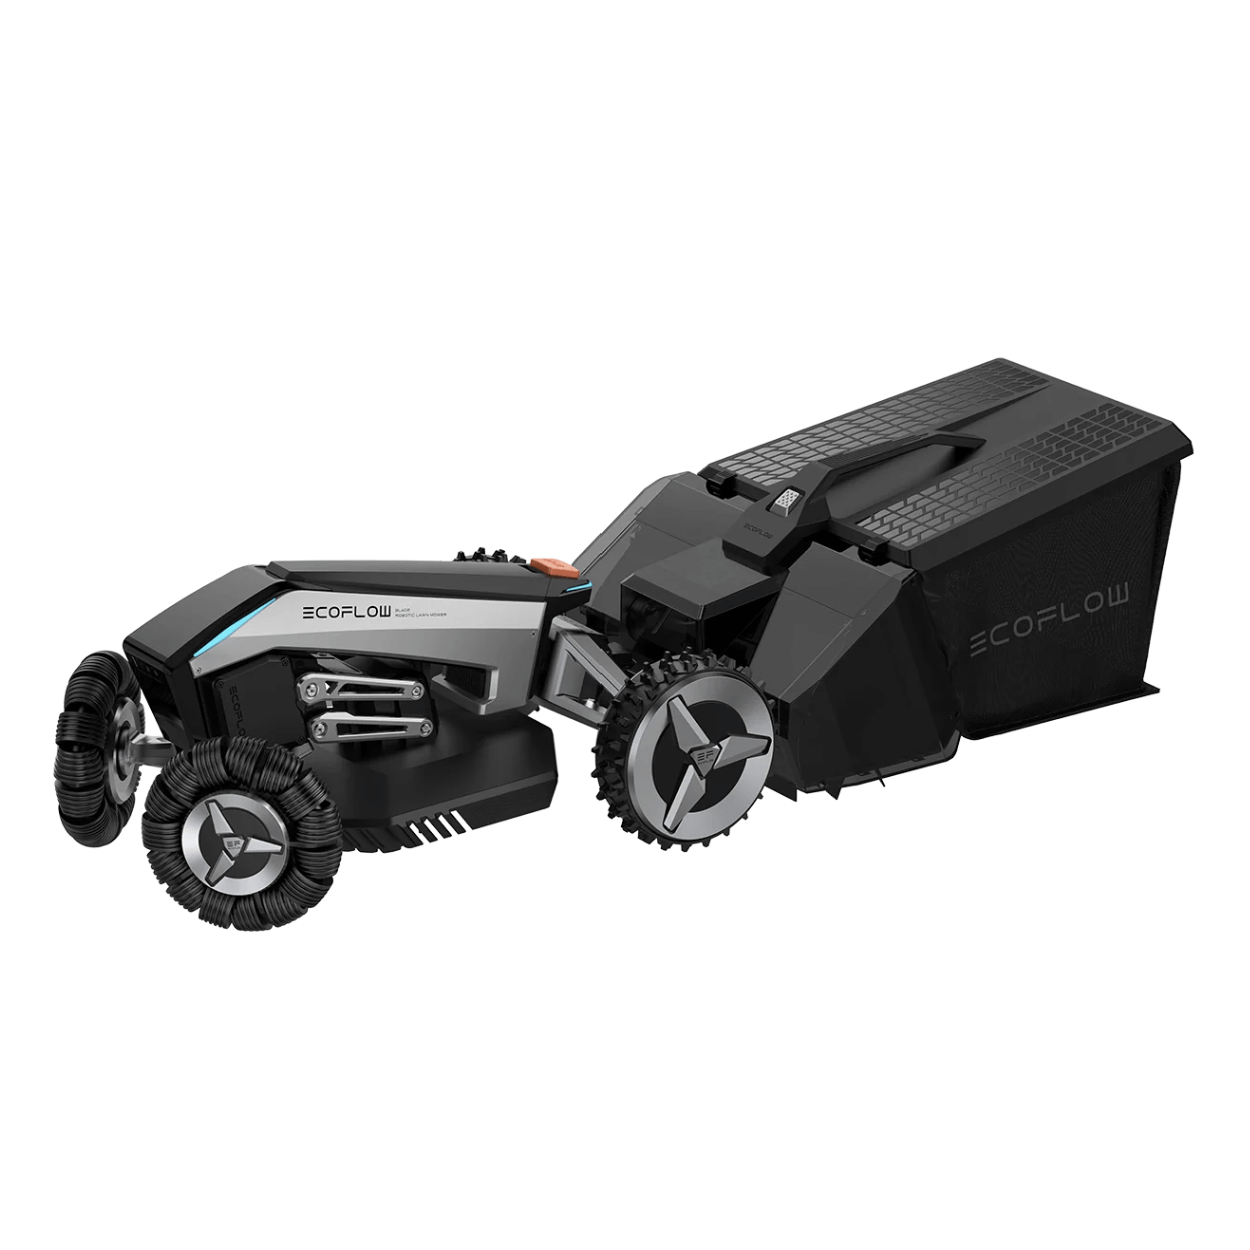 EcoFlow BLADE Robotic Lawn Mower and Sweeper Kit - 21.6 V Lithium Ion  Battery, Wire-Free Boundaries, Auto-Route Planning with GPS, RTK Smart  Obstacle Avoidance, Water-Resistant Anti-Theft Auto Lock Ro